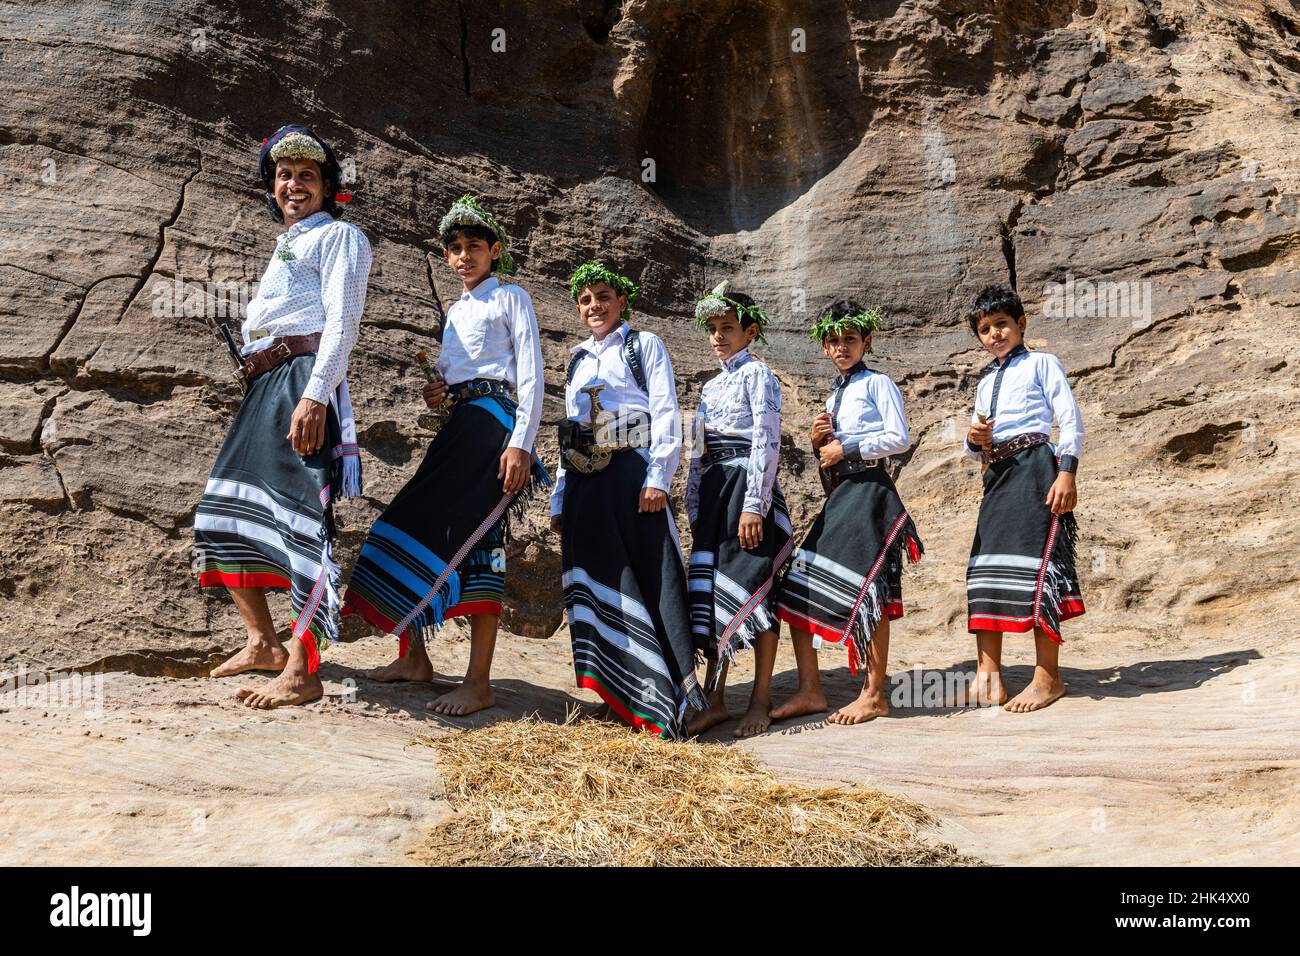 Young man and boys of the Qahtani flower tribe, Asir Mountains, Kingdom of Saudi Arabia, Middle East Stock Photo